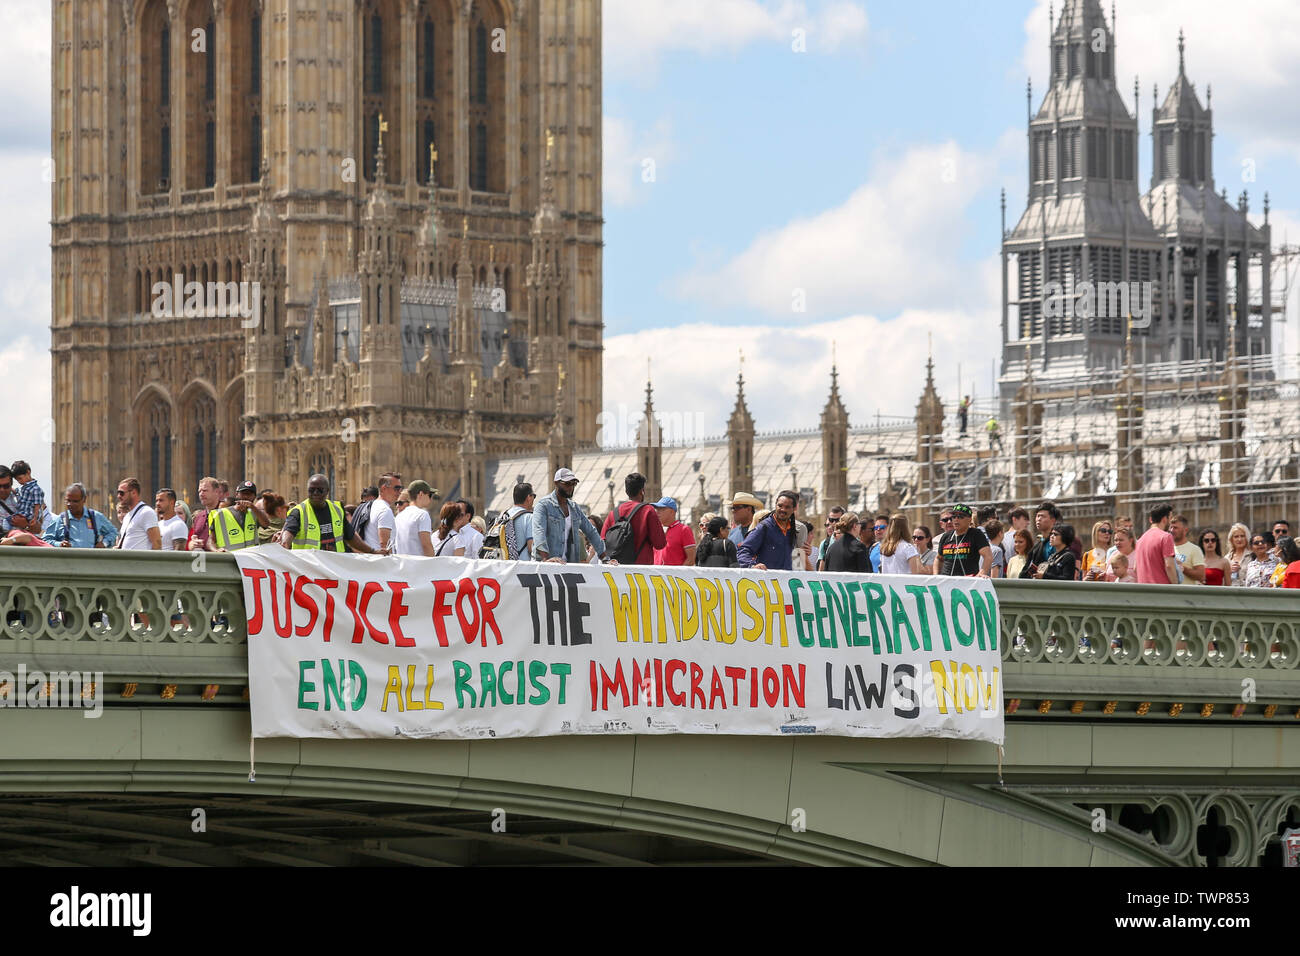 Westminster Bridge, London, UK. 22nd June, 2019. A banner drop from Westminster Bridge as part of the National Windrush Day of Action calling for justice and full compensation for victims of the Windrush scandal. Credit: Penelope Barritt/Alamy Live News Stock Photo